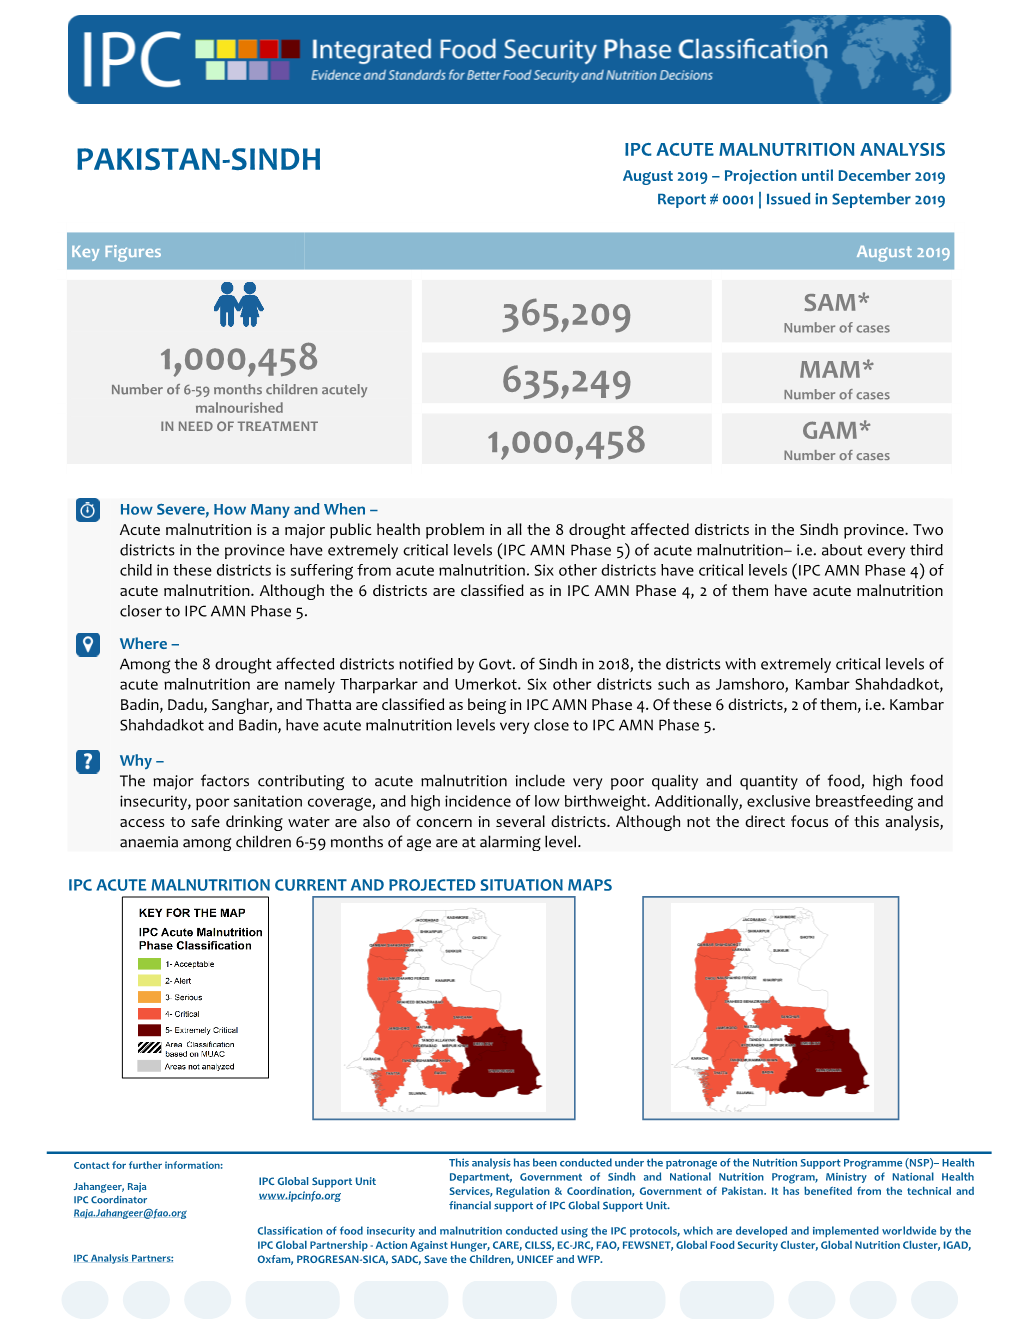 PAKISTAN-SINDH August 2019 – Projection Until December 2019 Report # 0001 | Issued in September 2019